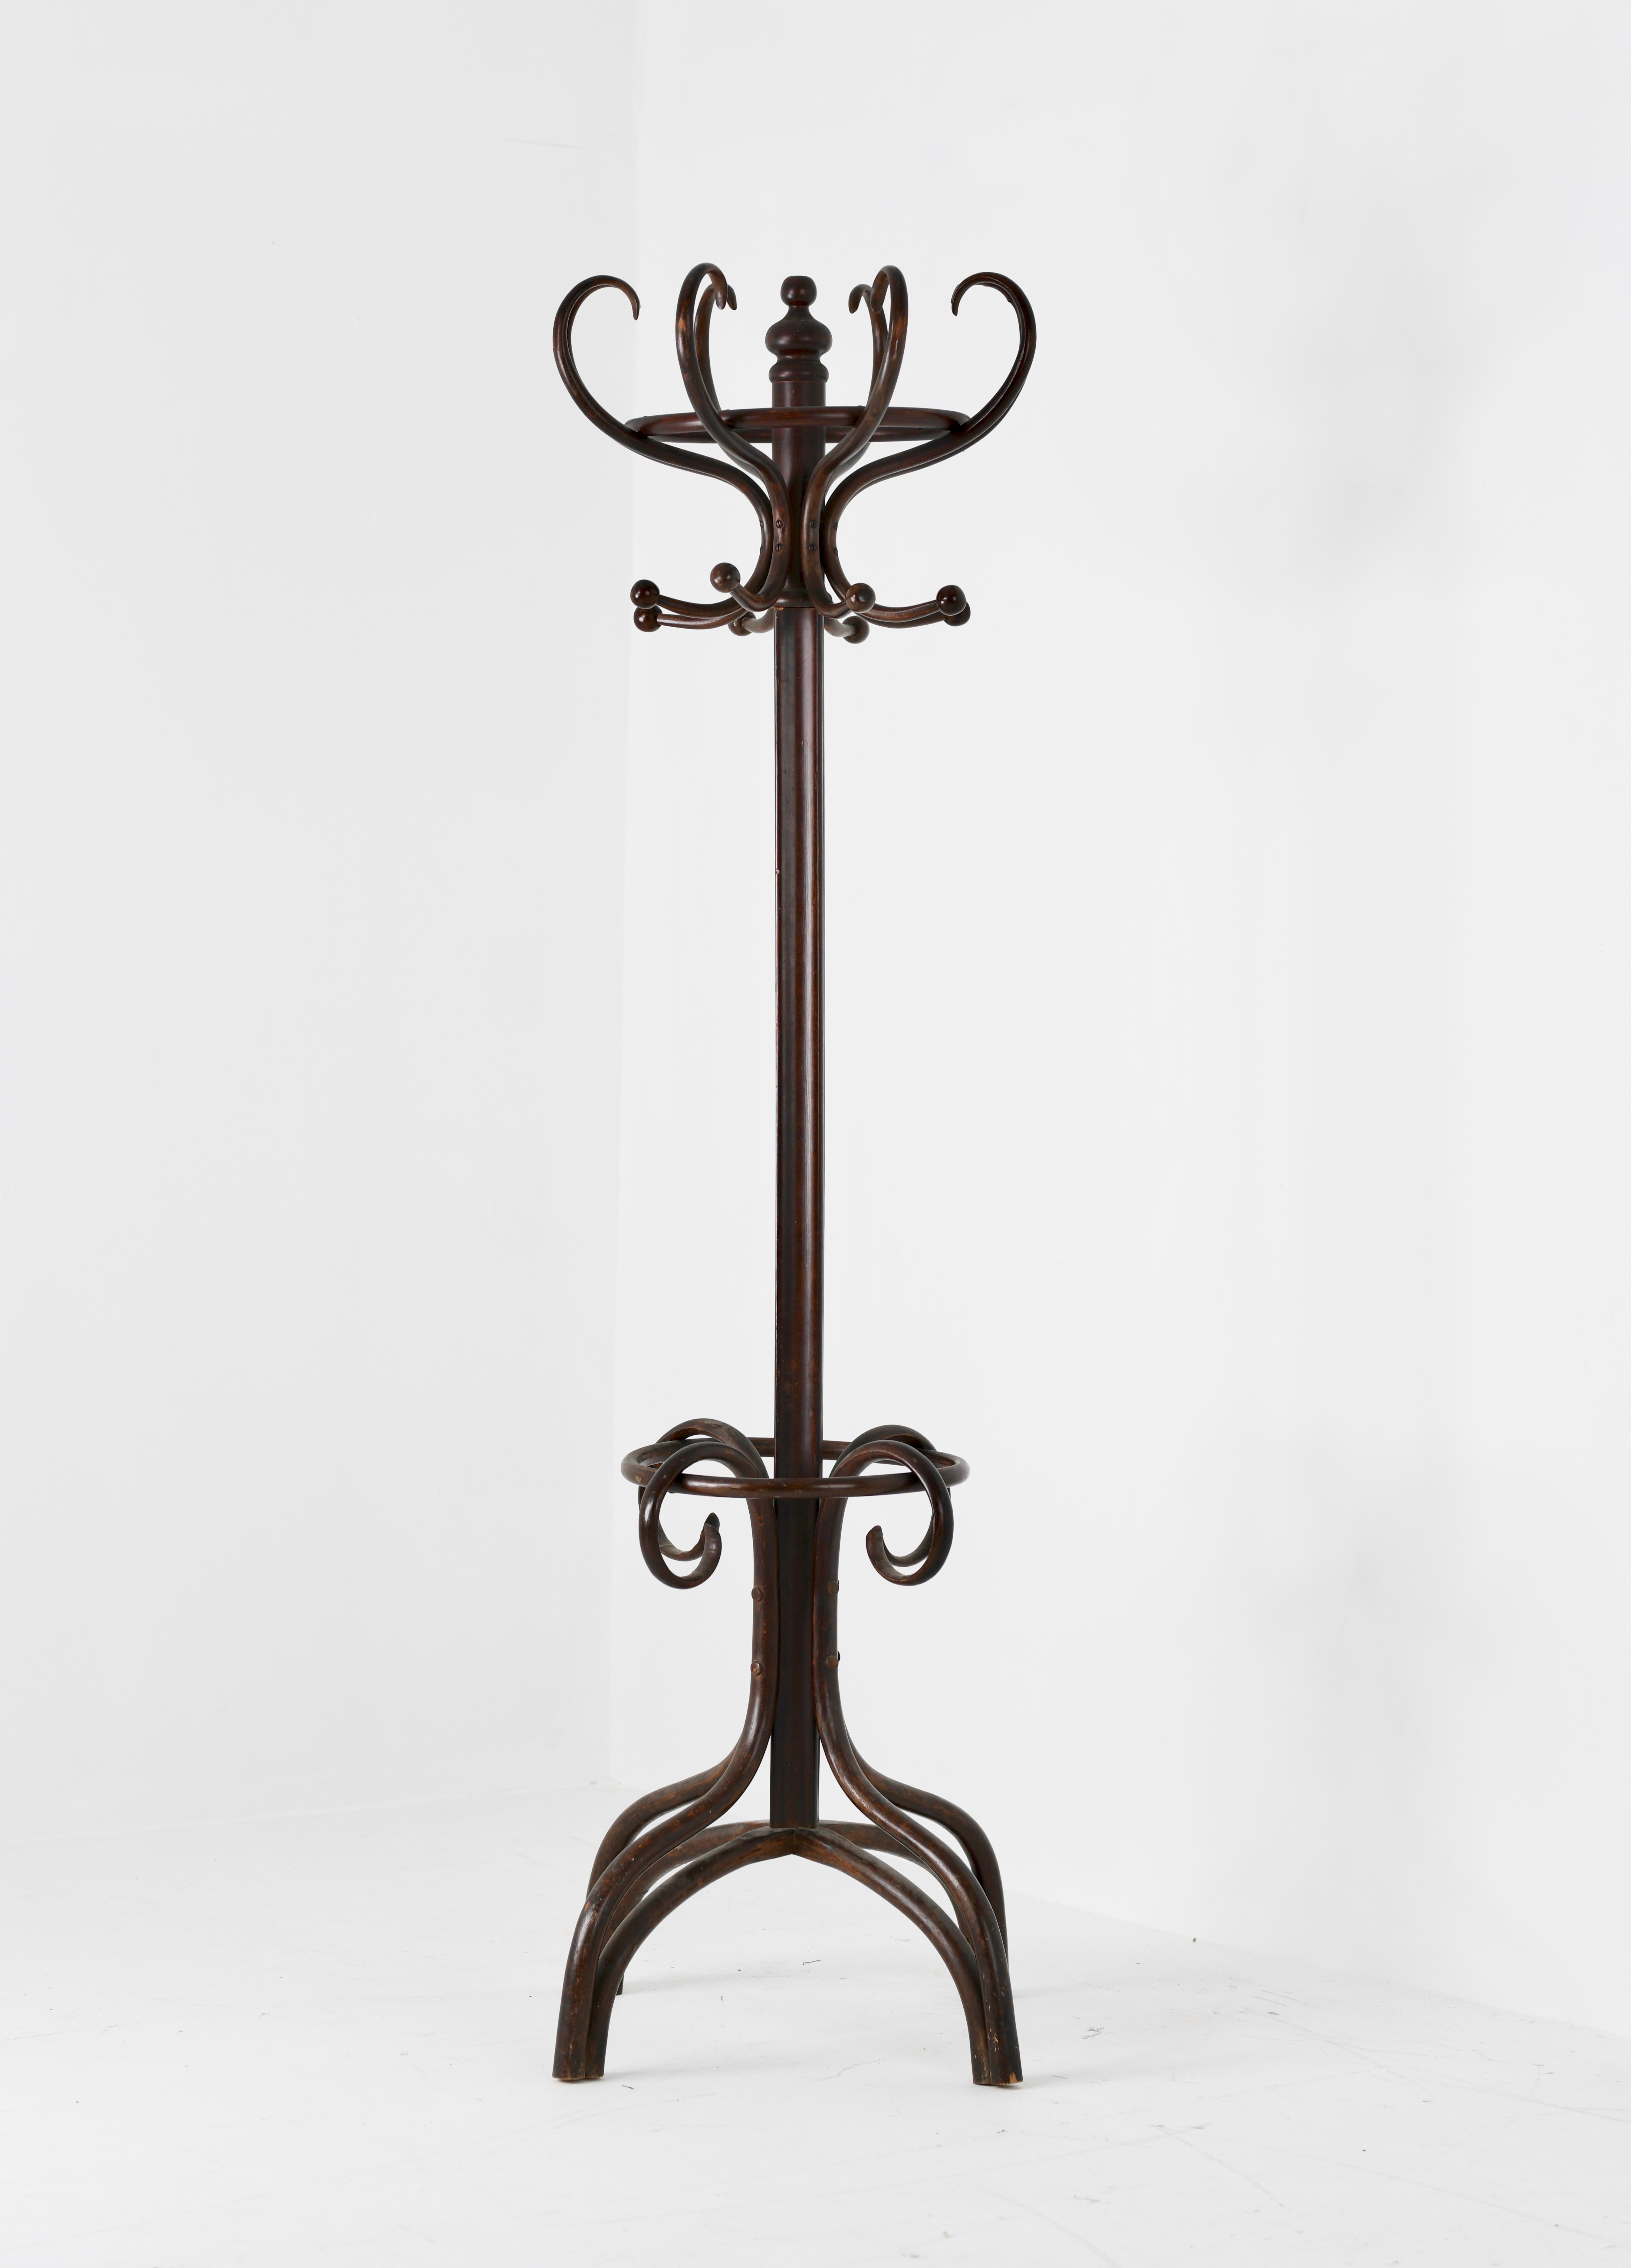 'Fischel' steam bentwood coat tree in the Secessionist School. This period example still retains the original paper label. Eight arm top, swivels to facilitate hanging and accessing your garments. Wonderful original condition.
The base has four